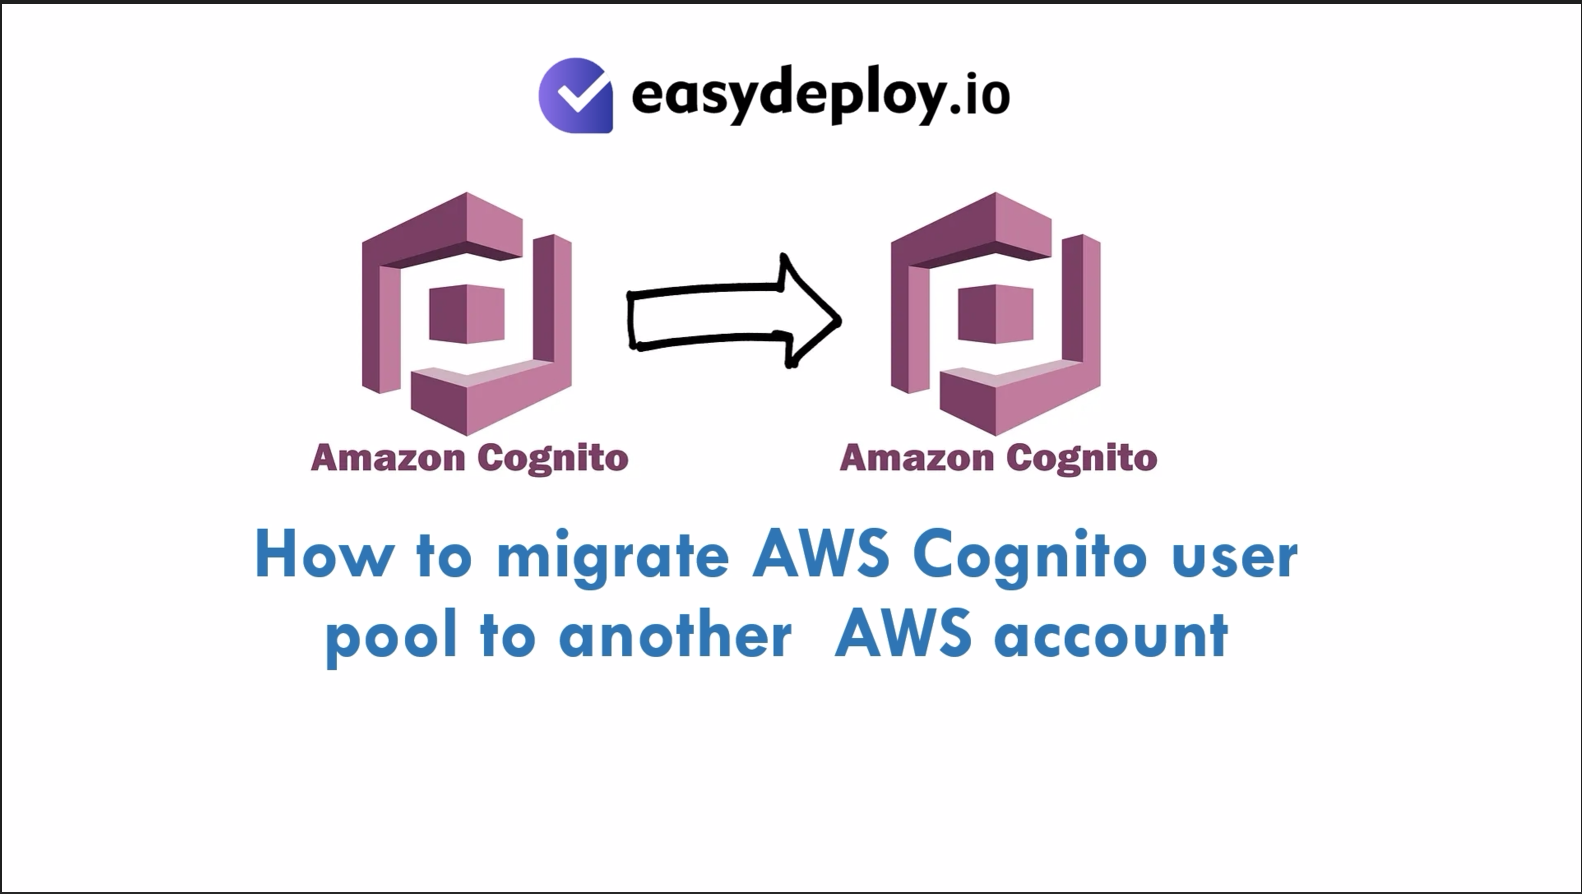 How to migrate AWS Cognito user pool to another AWS account. No password change.